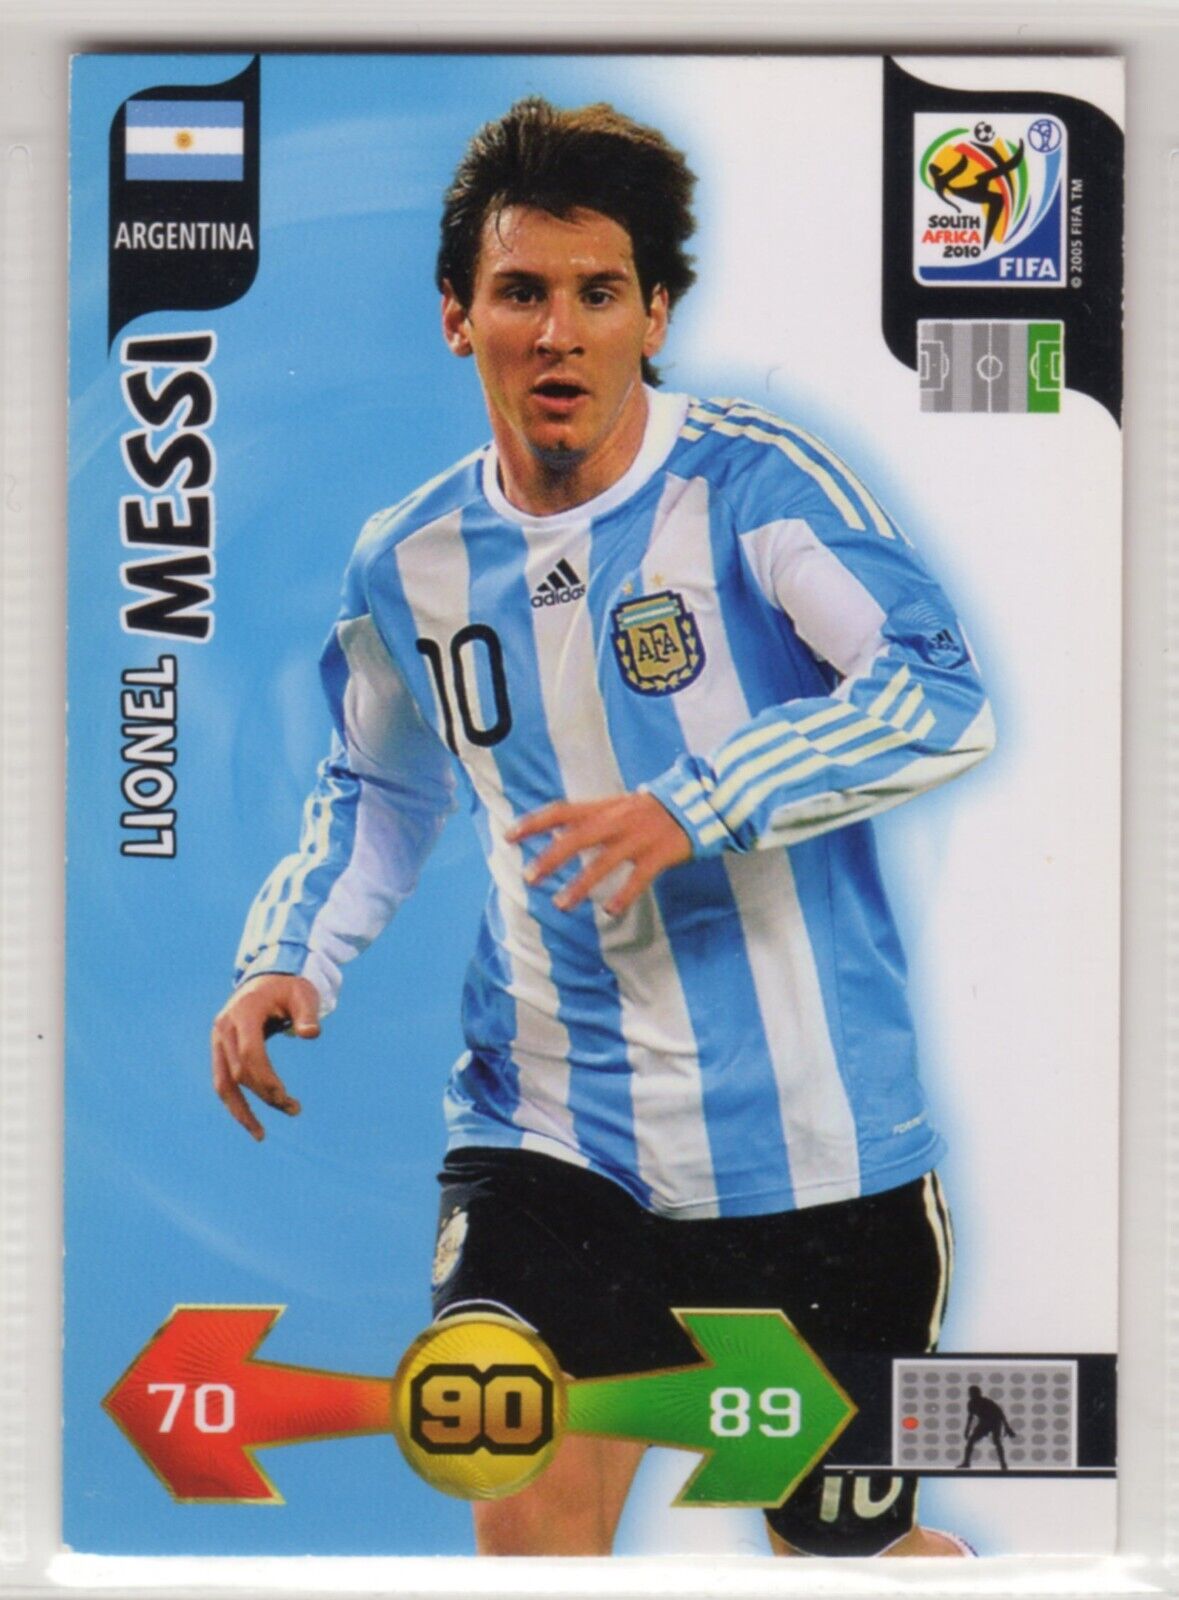 LIONEL MESSI - TOPPS / PANINI / MUNDICROMO - CHOOSE YOUR TRADING CARD